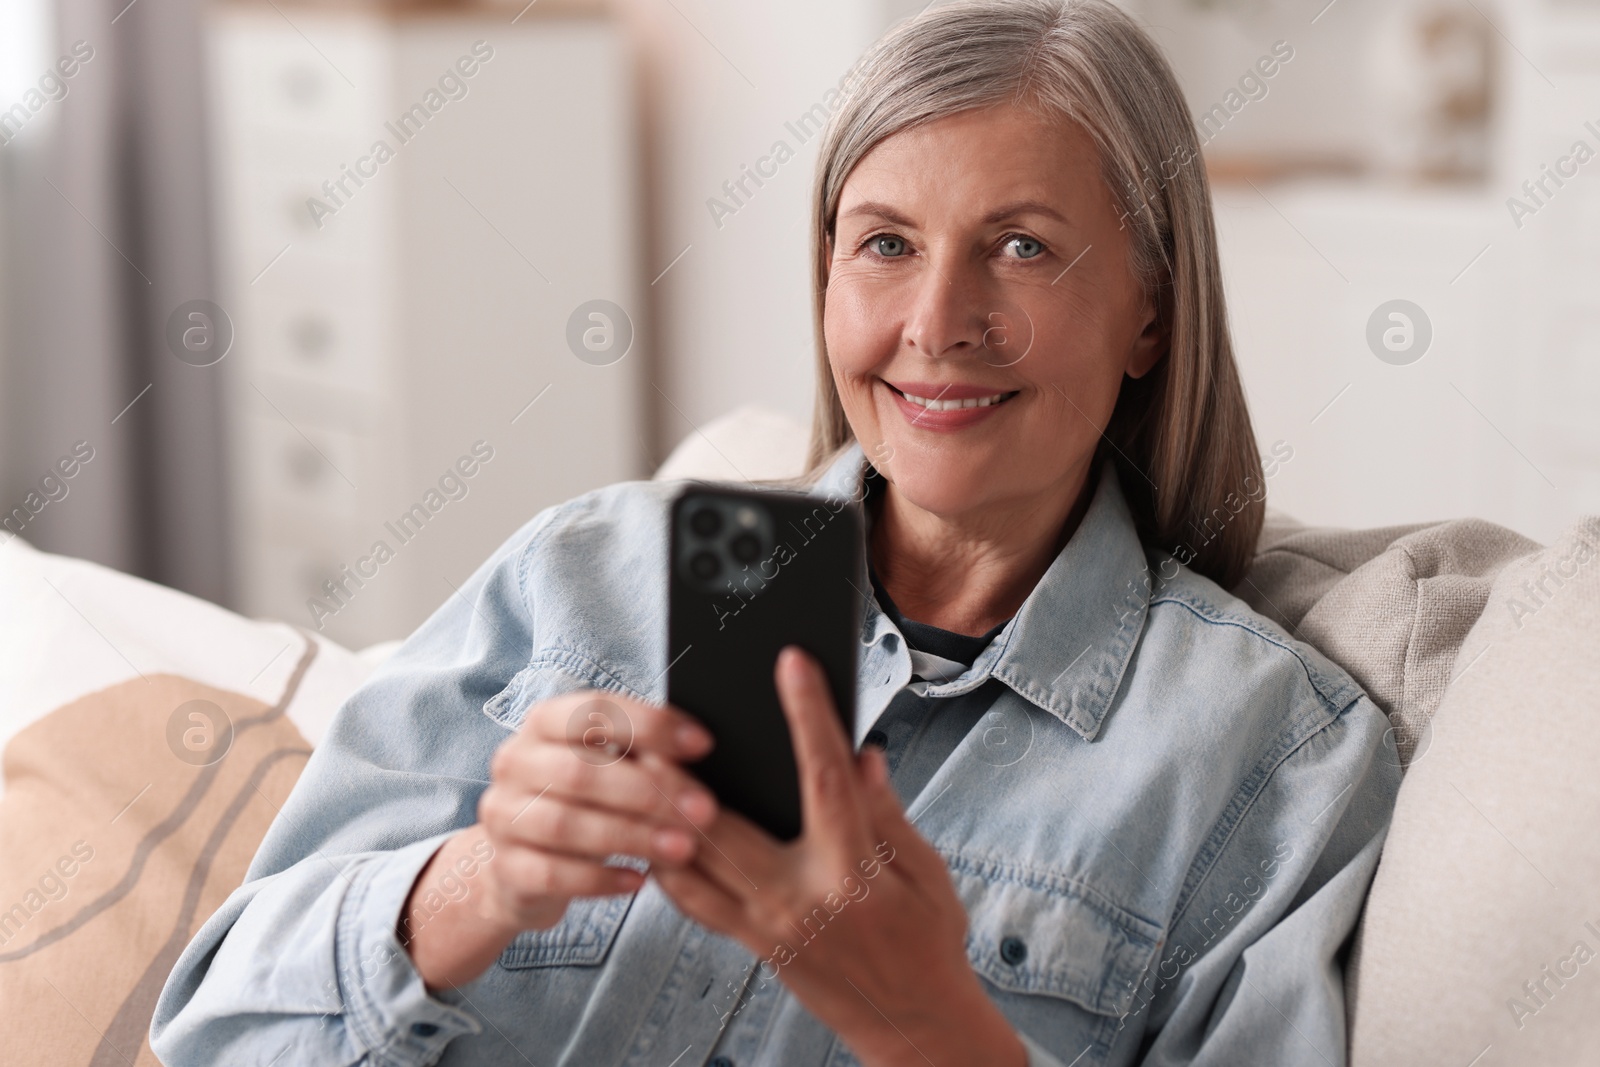 Photo of Senior woman using mobile phone at home